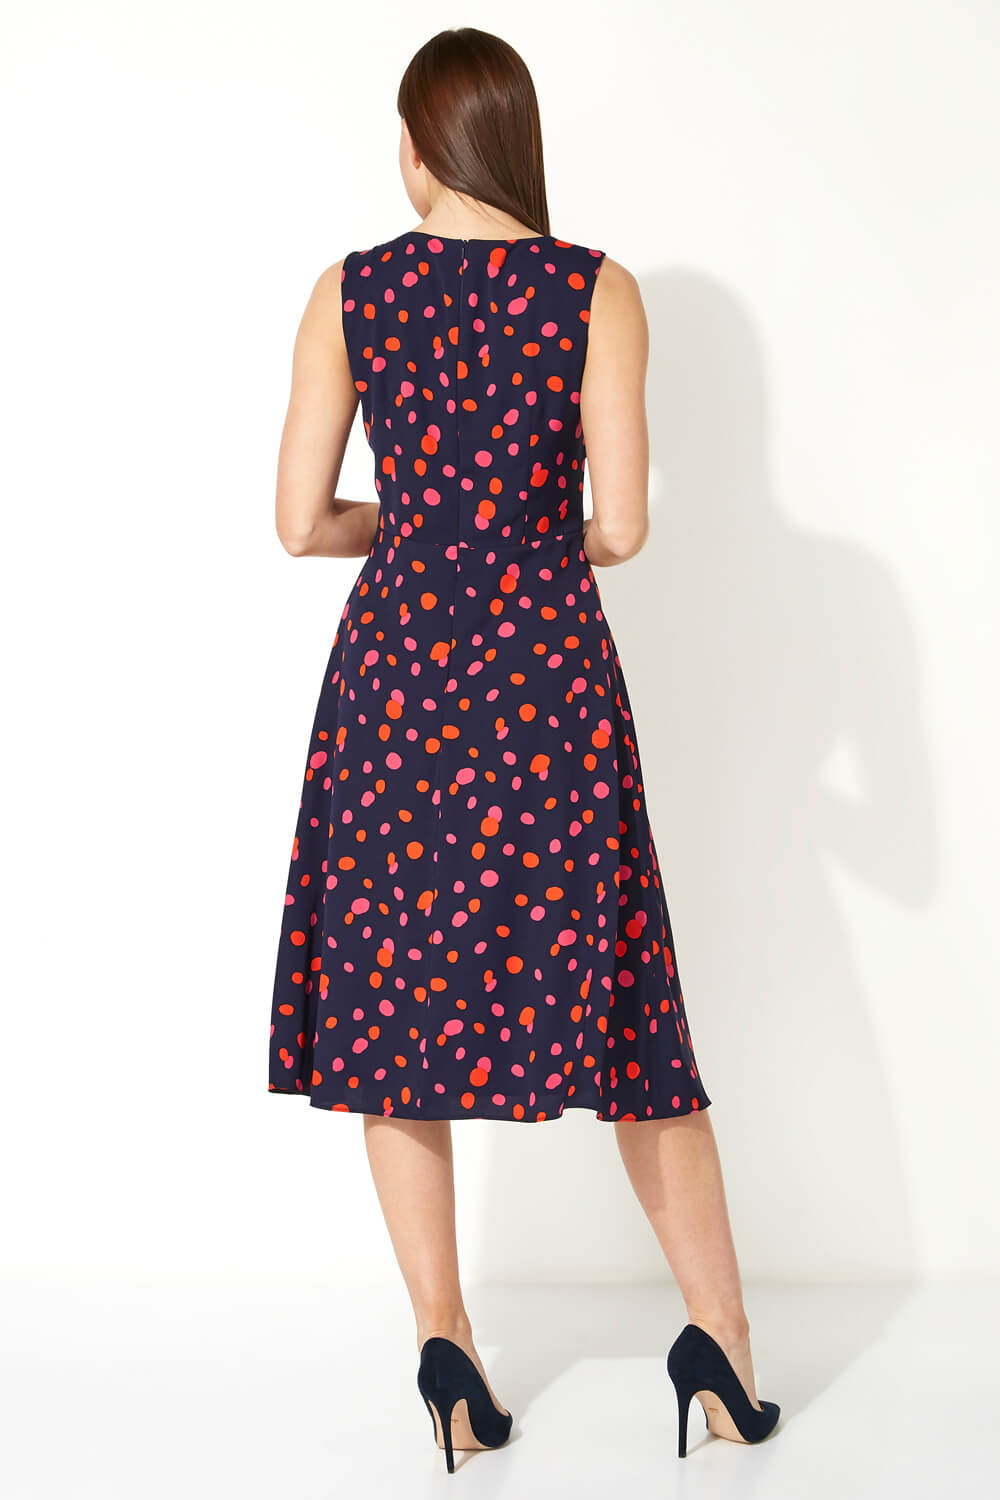 Navy  Polka Dot Fit and Flare Dress, Image 2 of 5